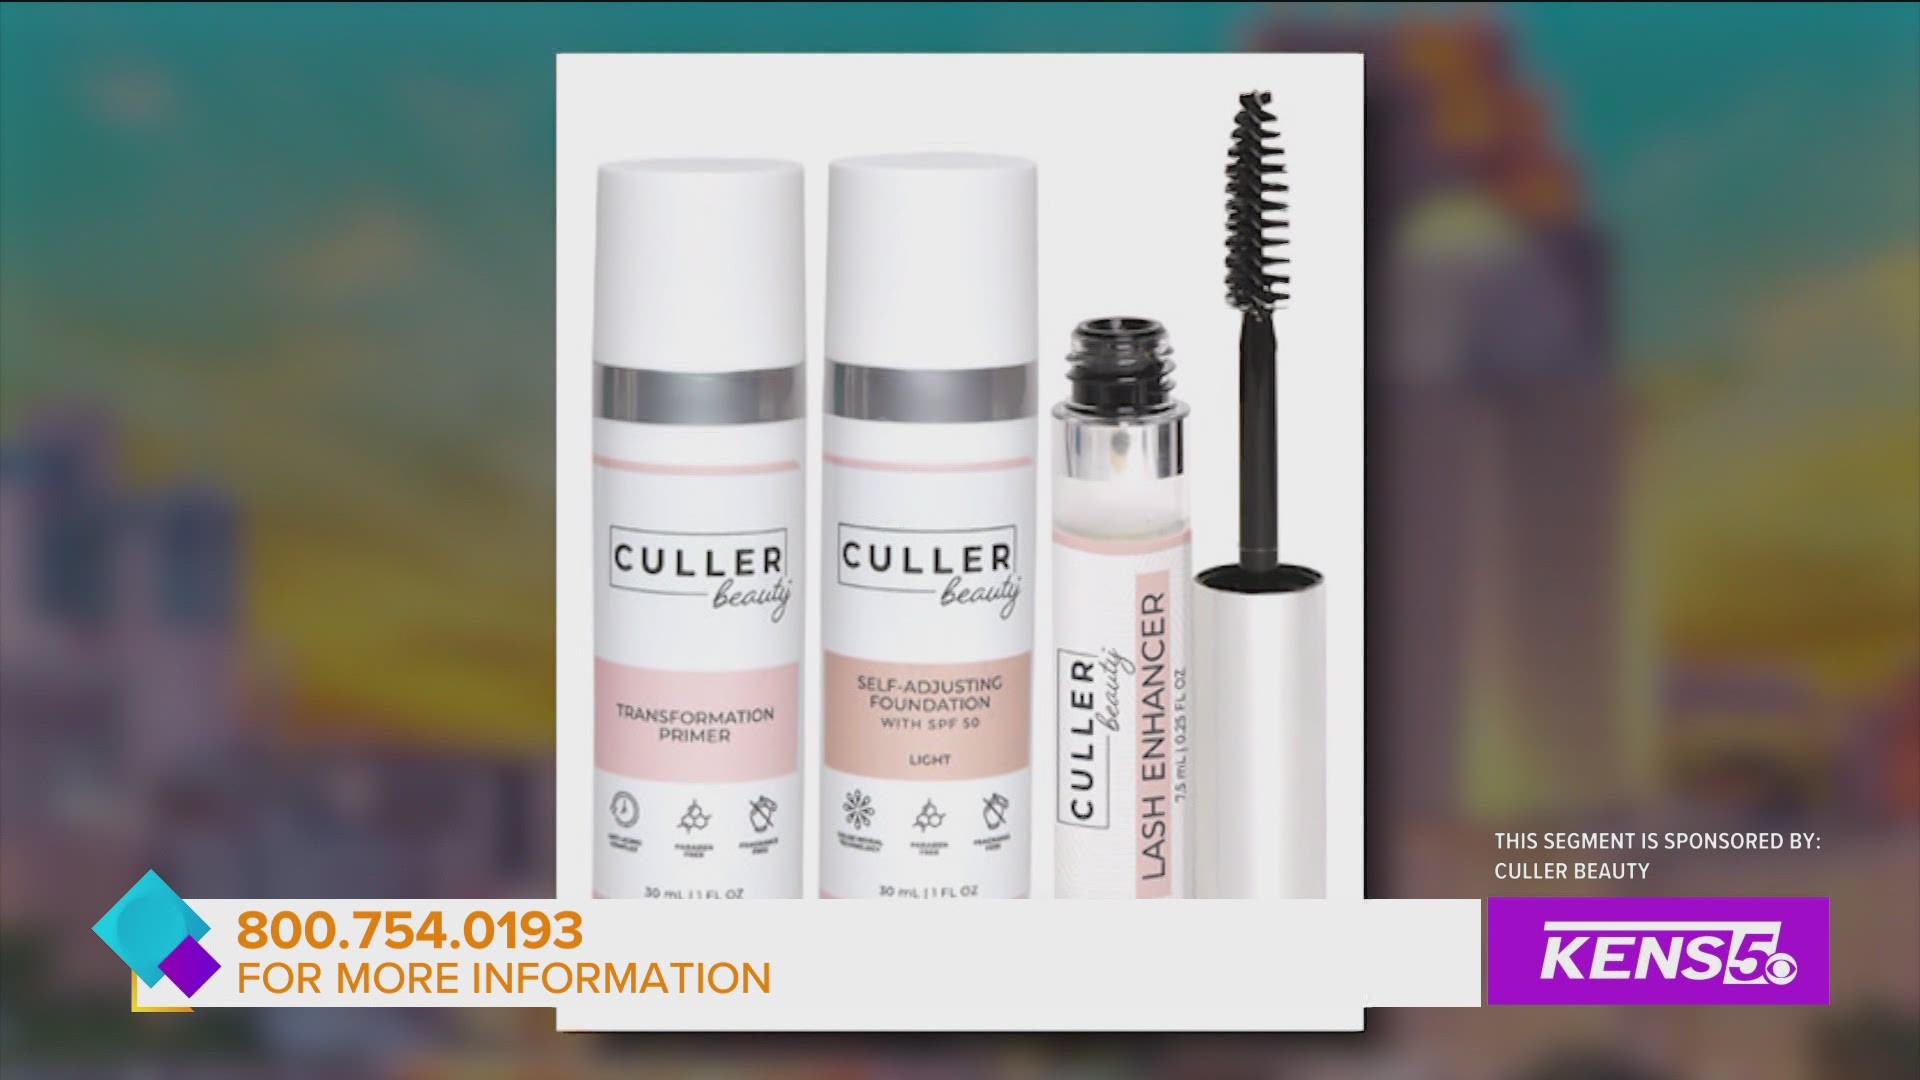 Sponsored by: Culler Beauty